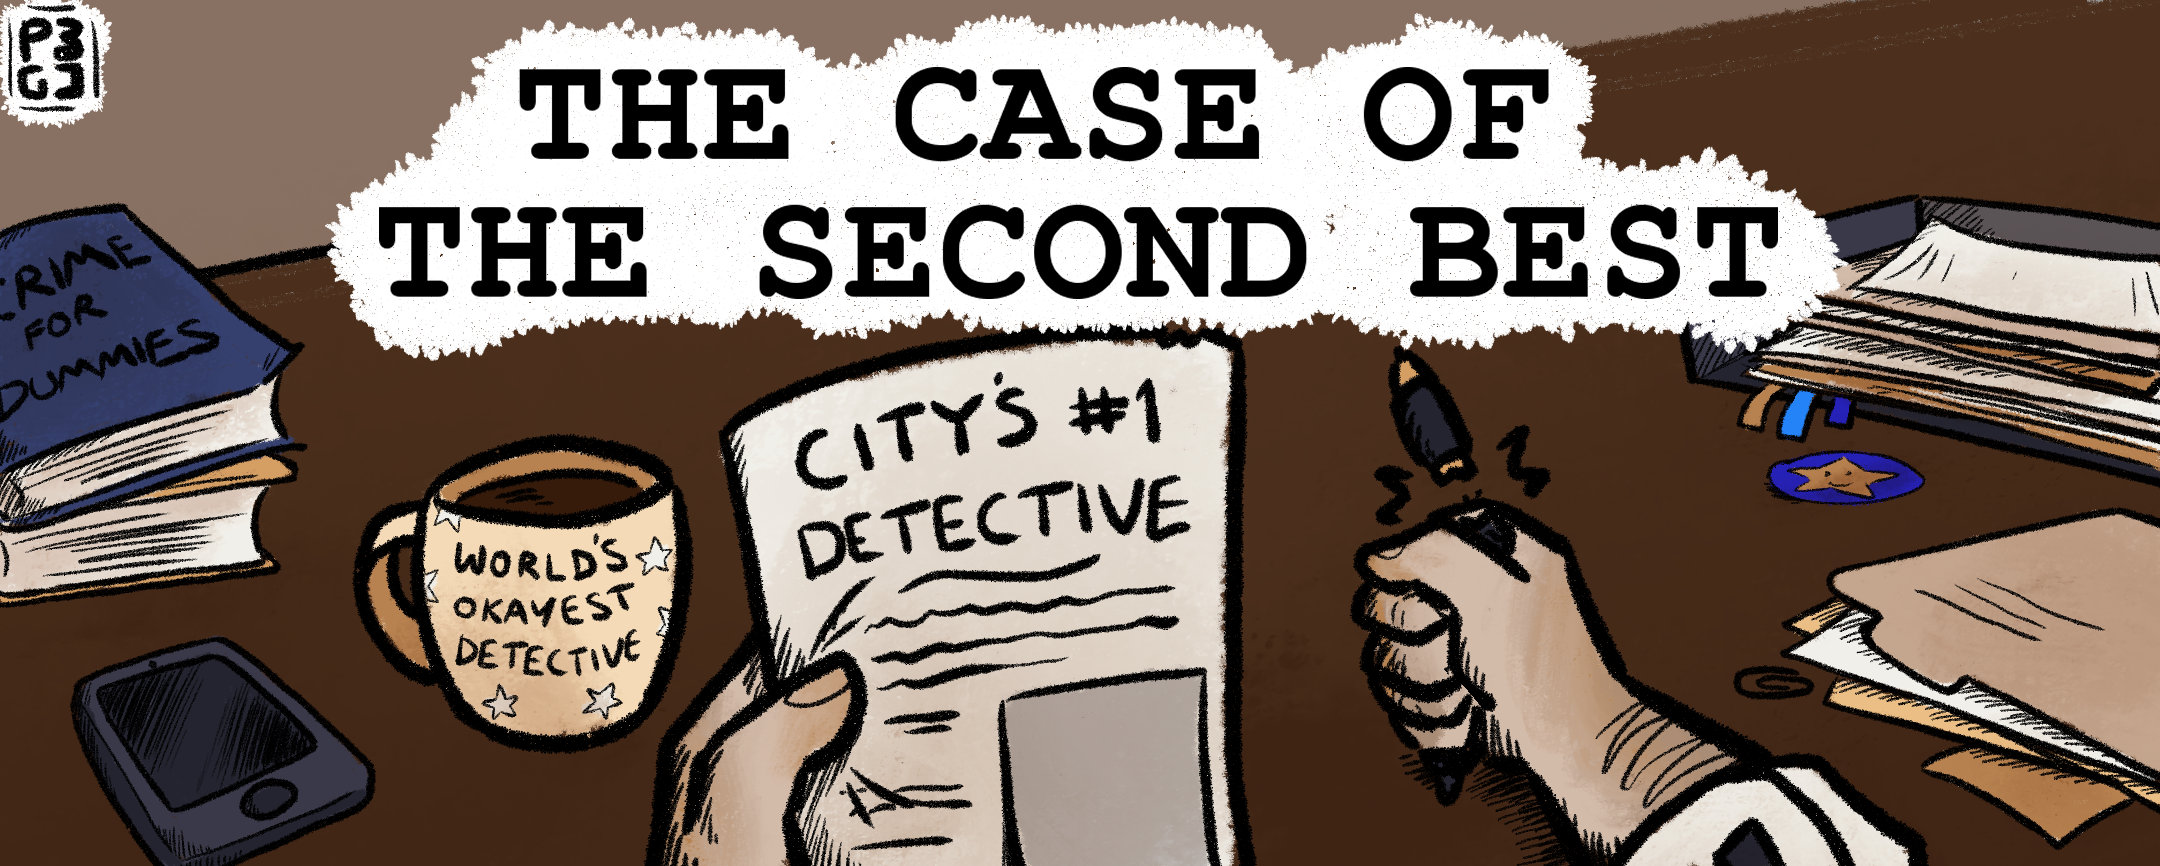 The Case of the Second Best